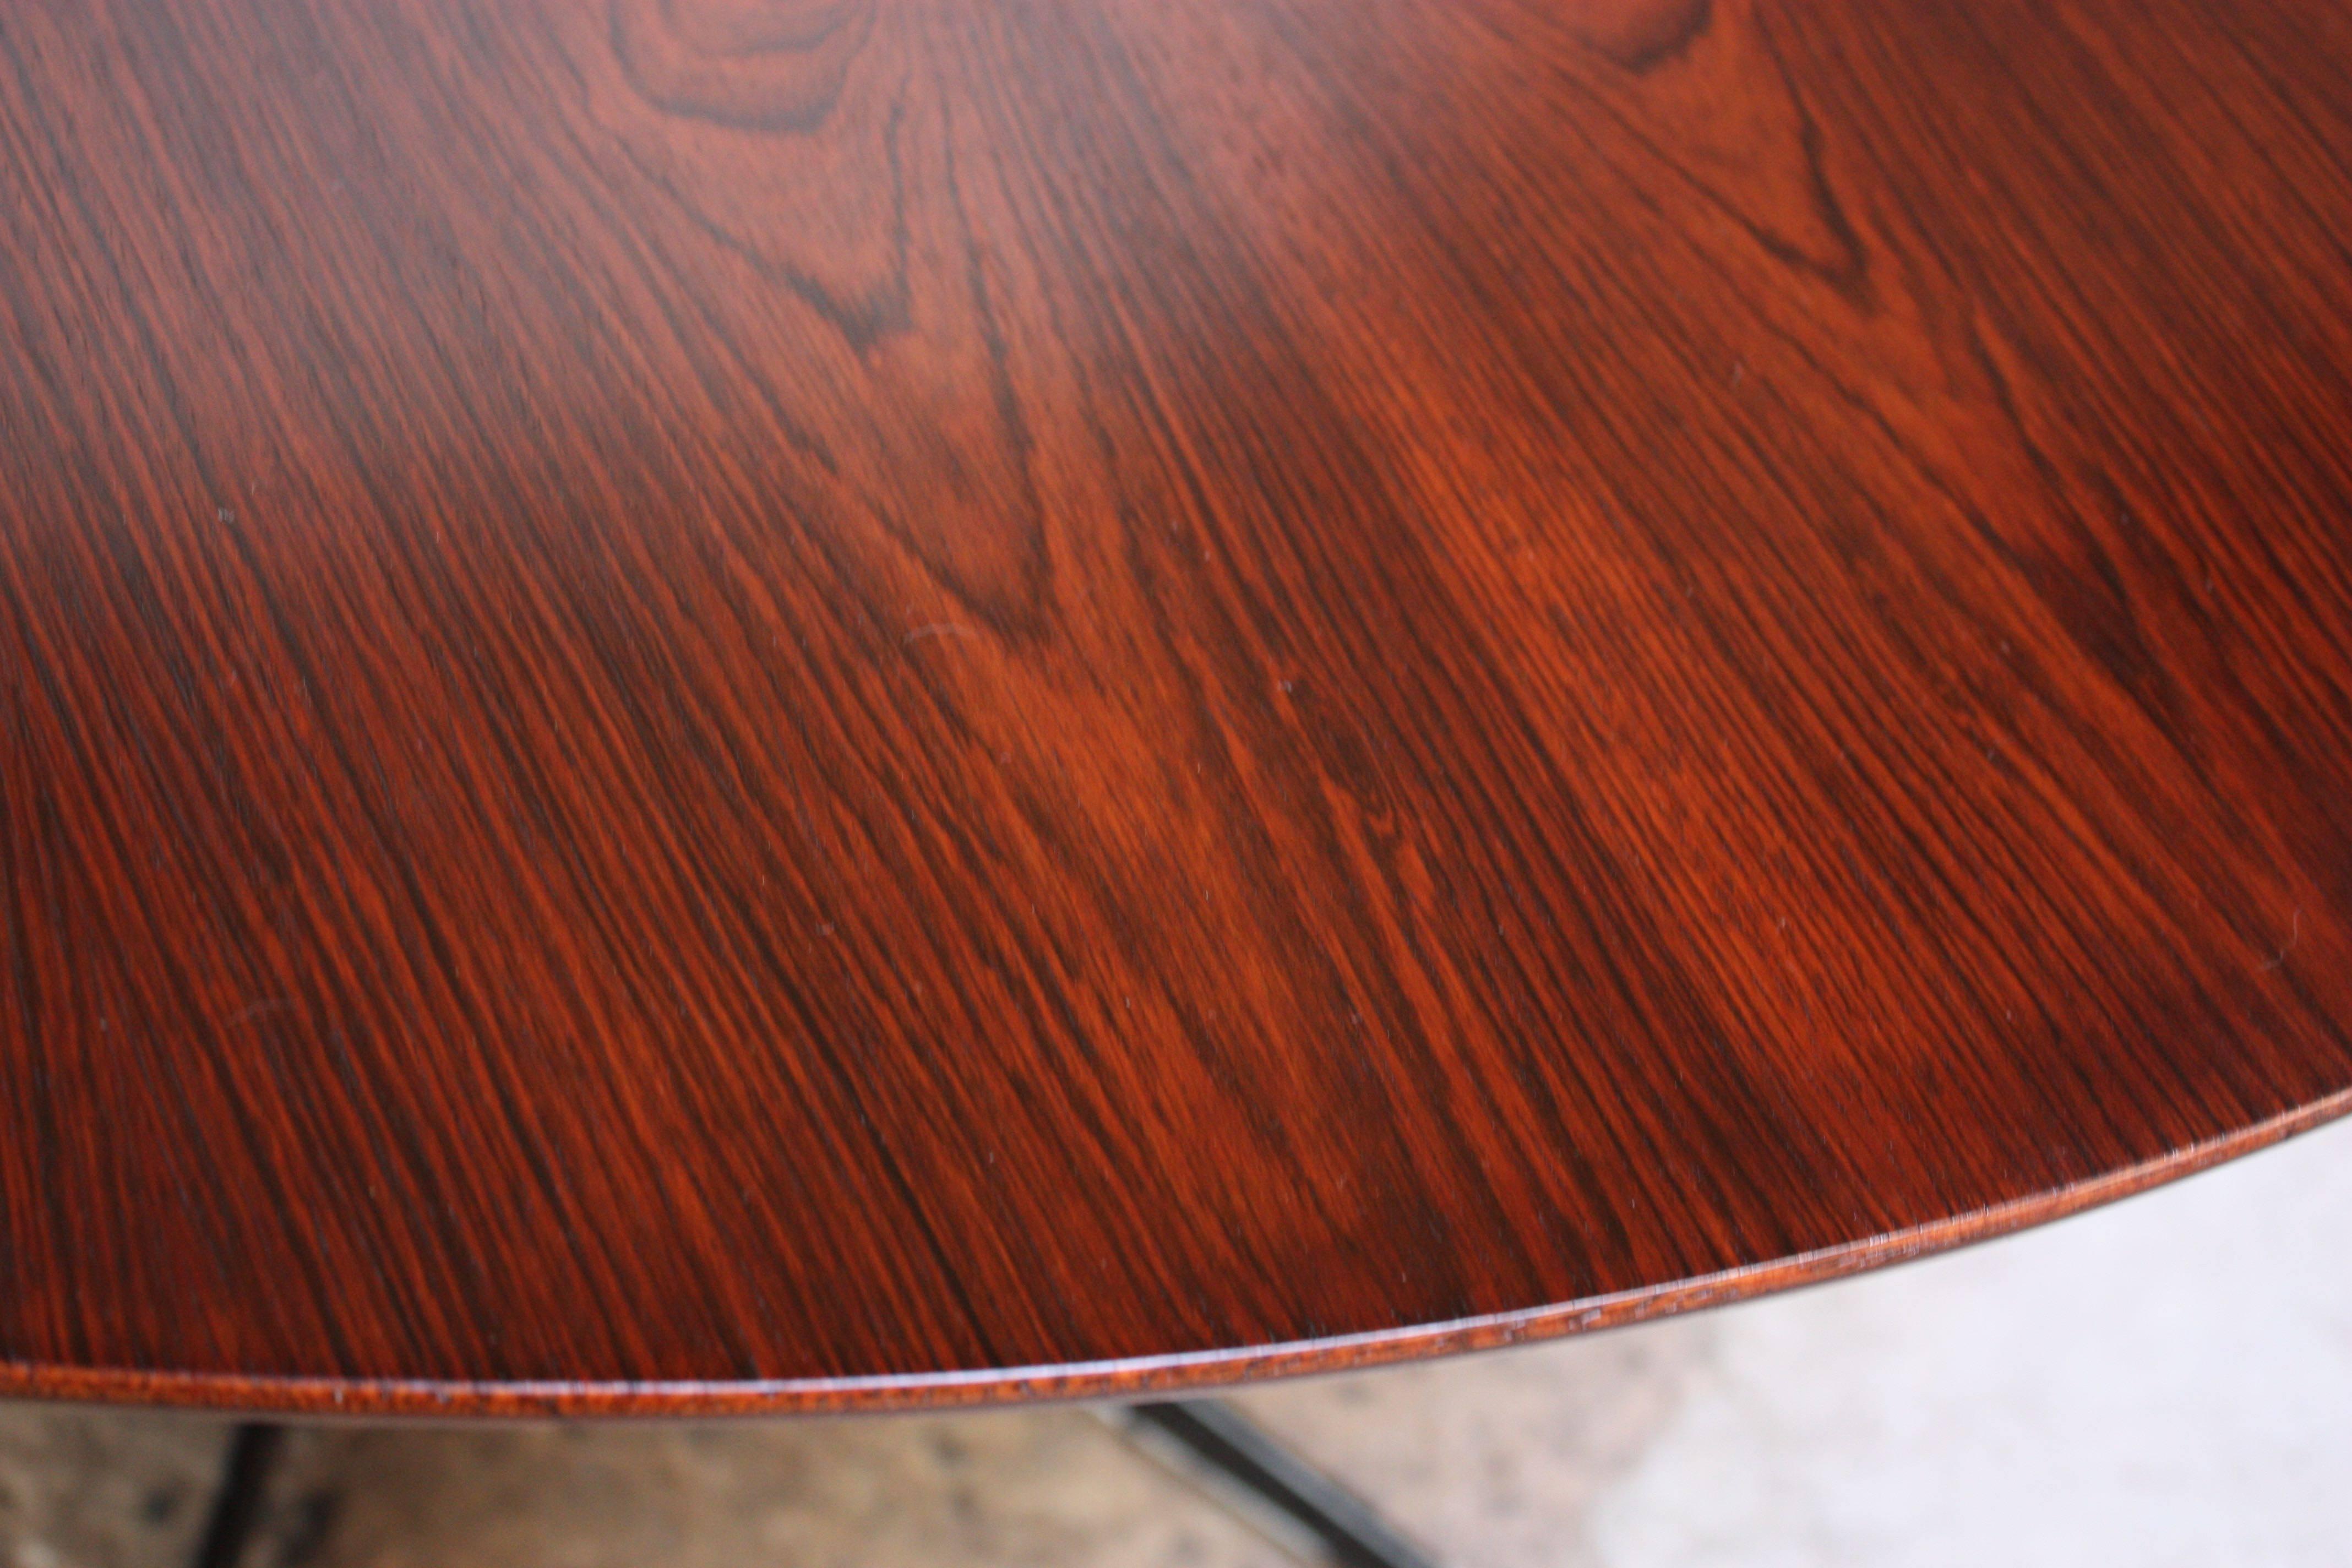 Lacquered Six-Star Series Rosewood Table by Arne Jacobsen for Fritz Hansen